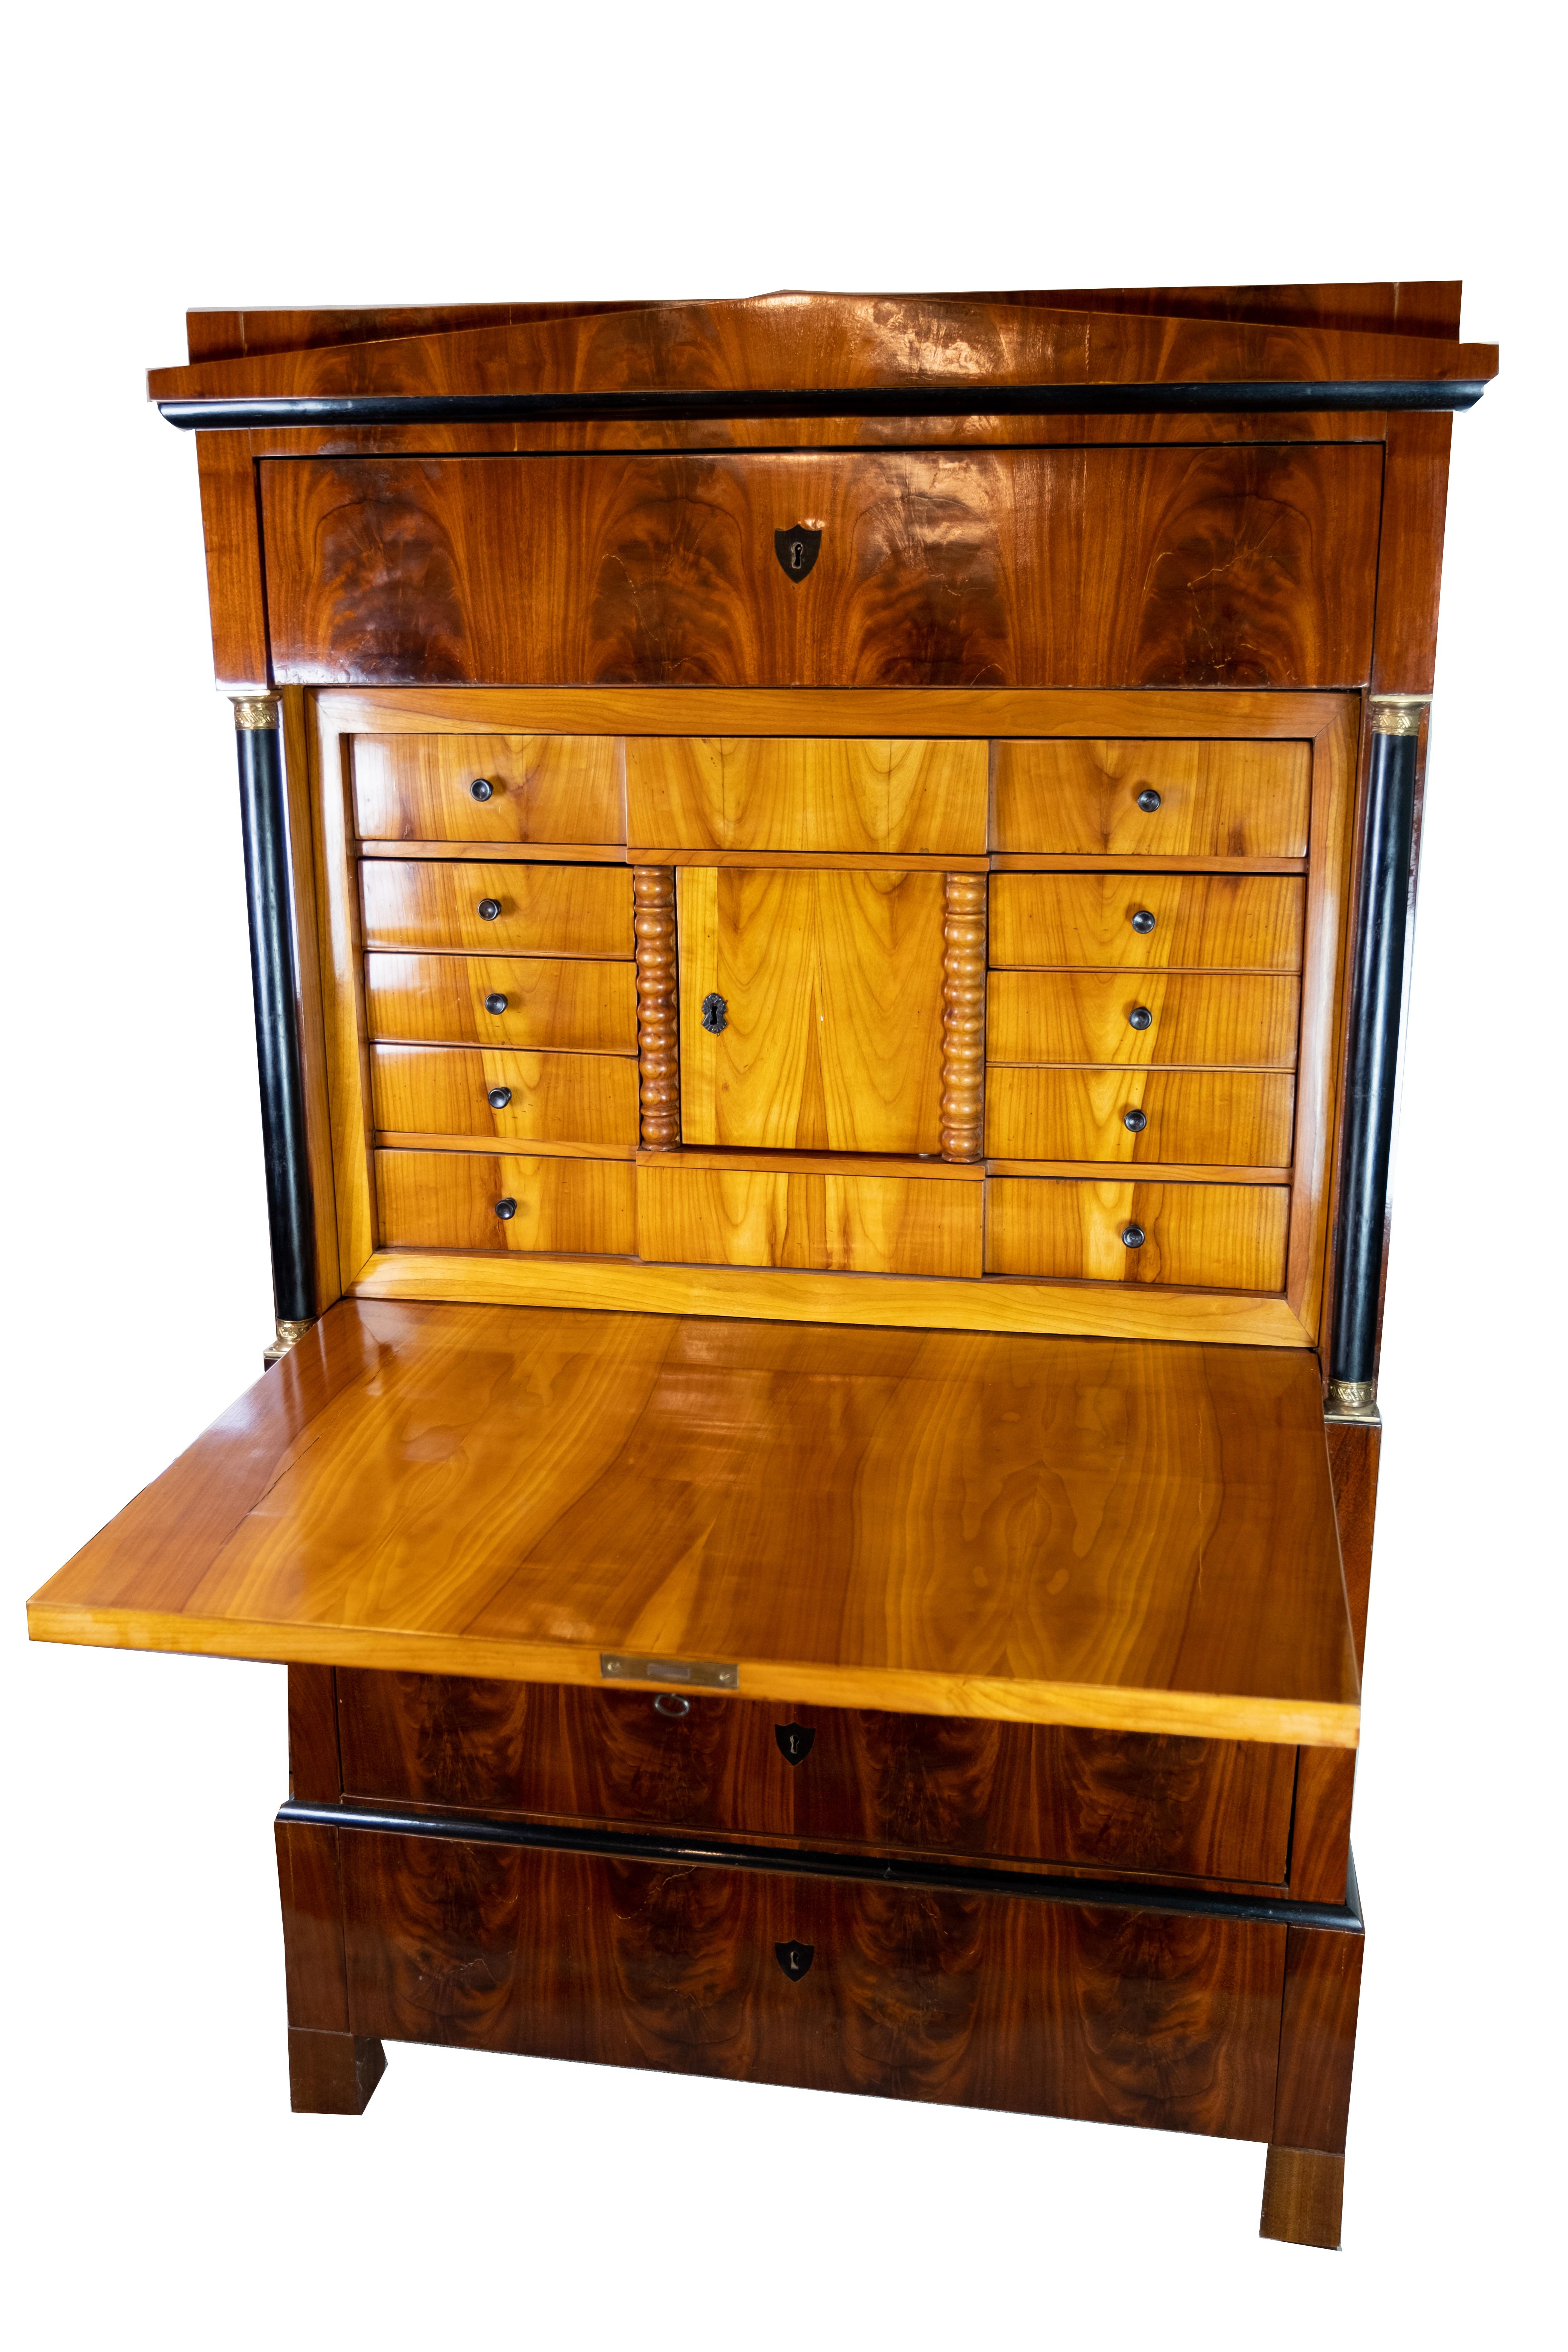 Polished Late Empire Cabinet of Handpolished Mahogany and of Cherry on the Inside, 1840